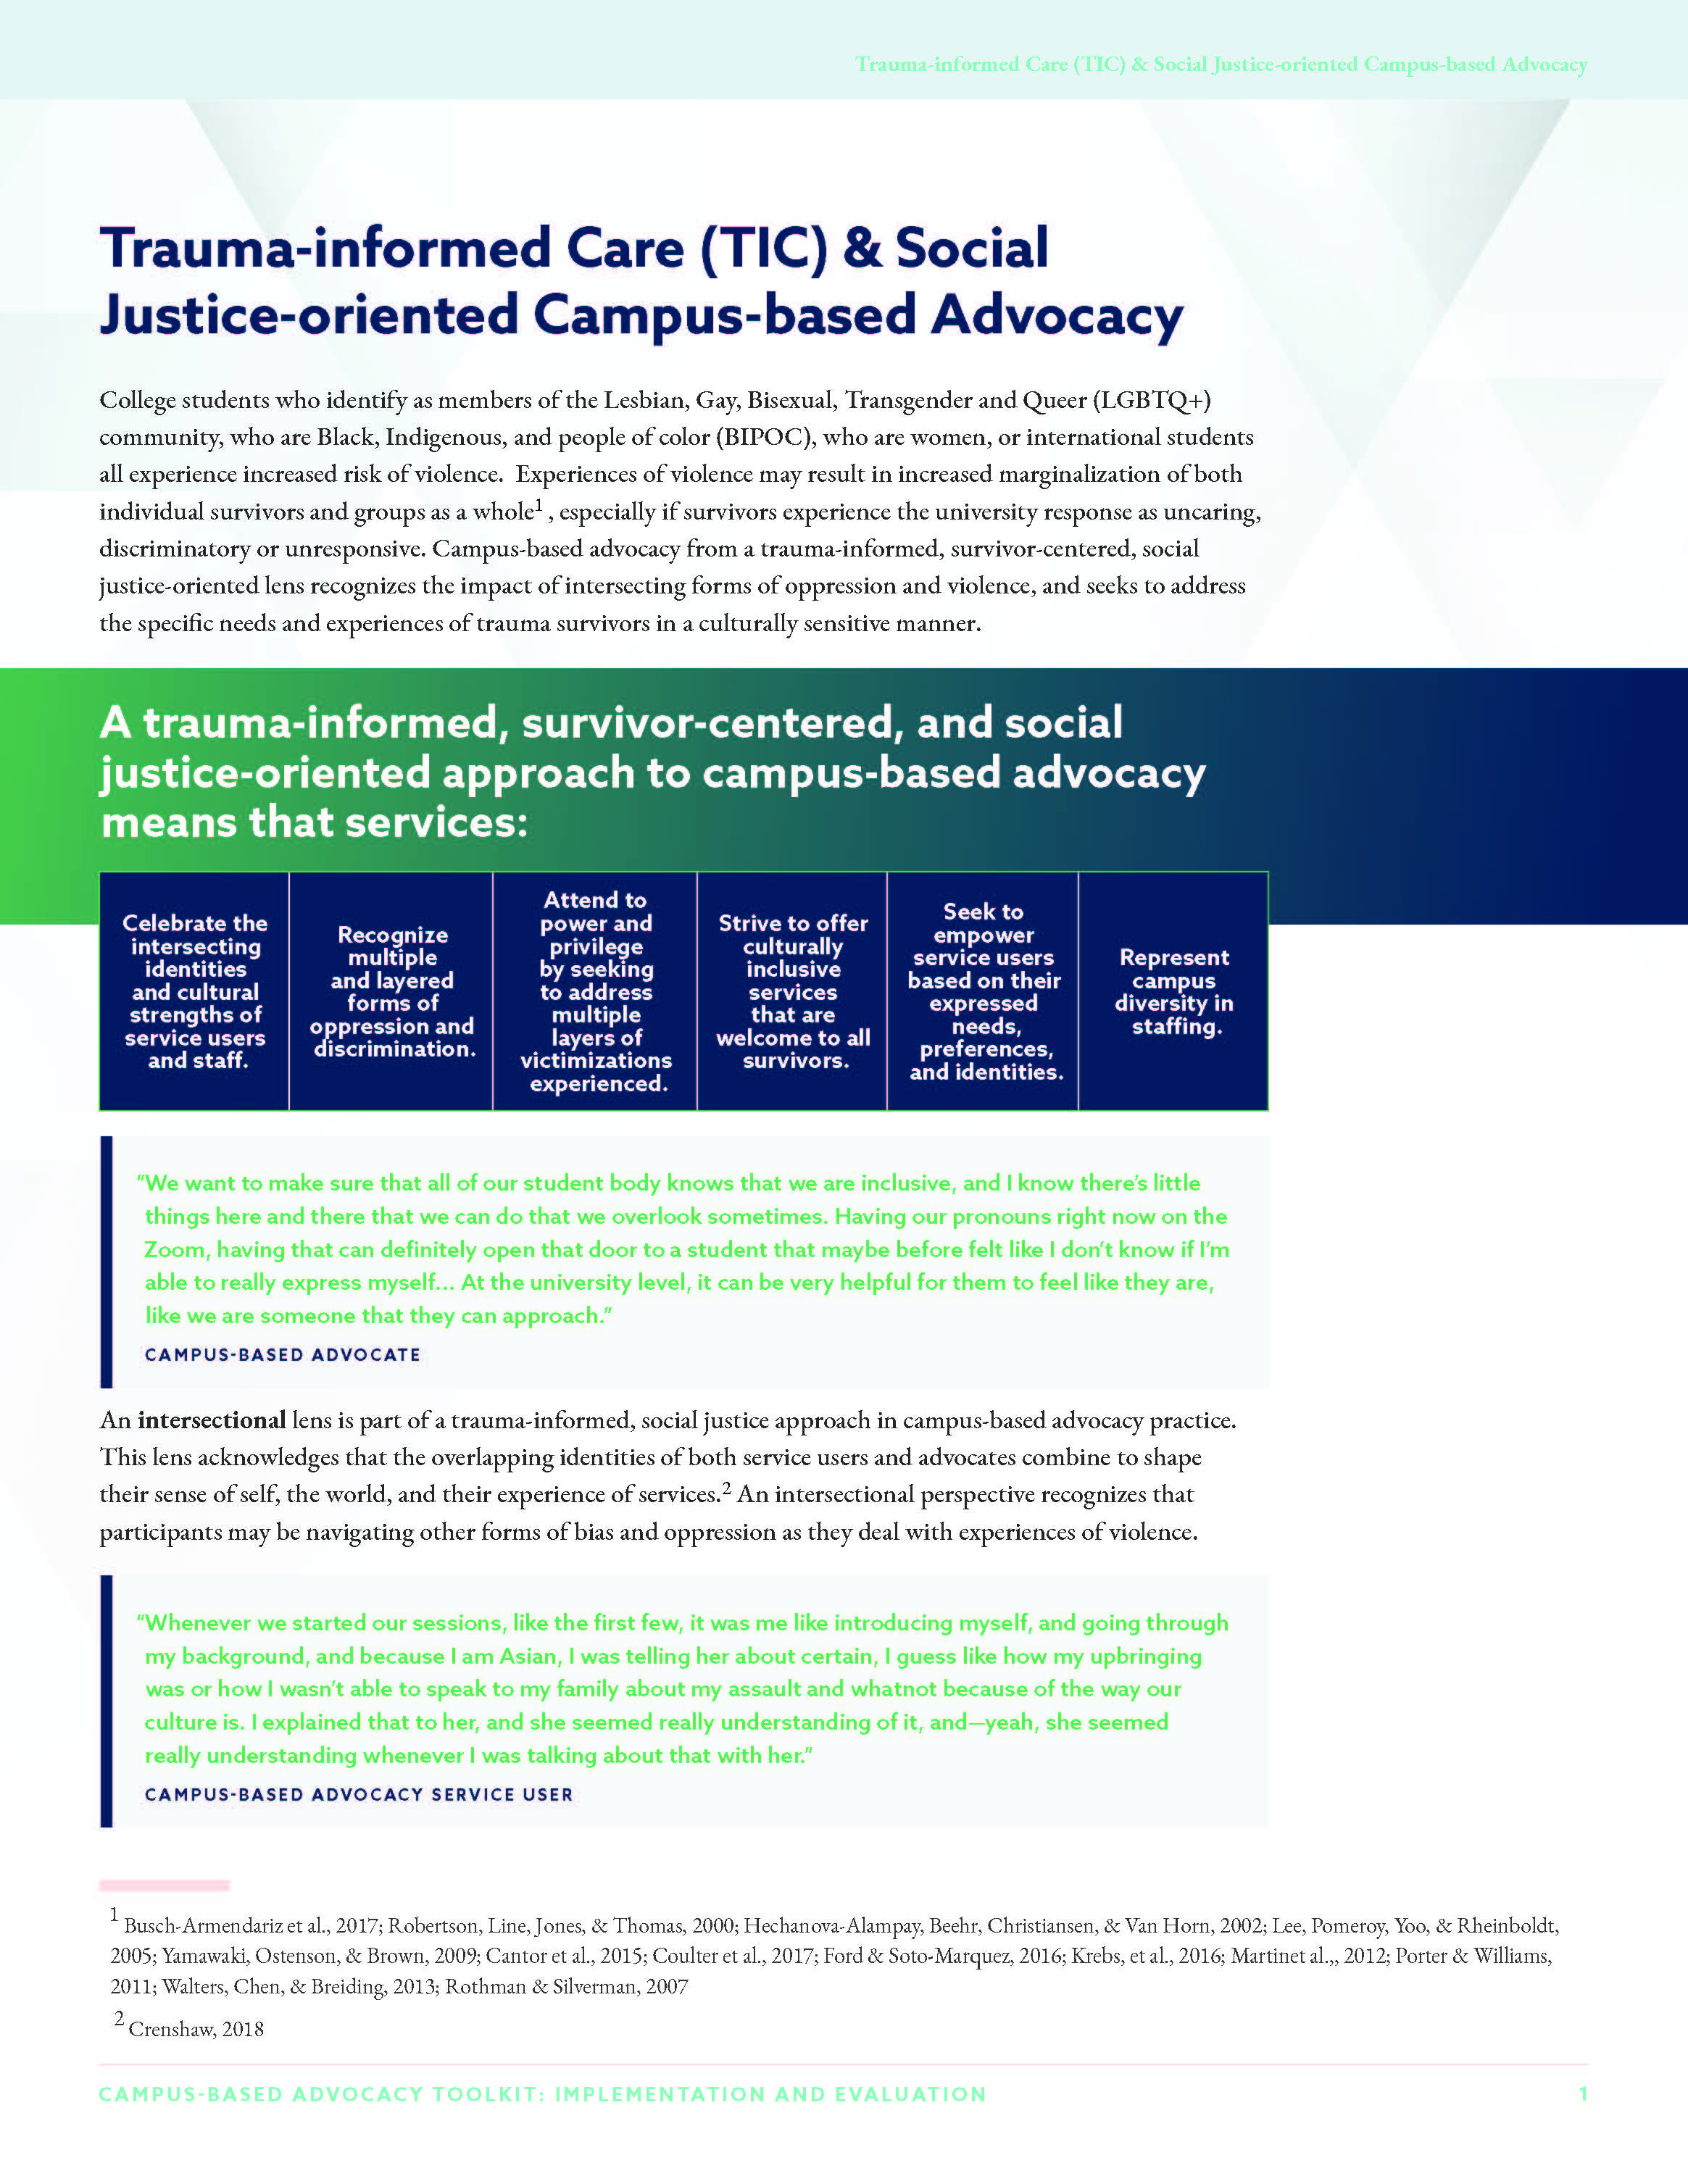 Trauma-informed Care_&_Social_Justice-oriented_Campus-based_Advocacy_rev2 (1)